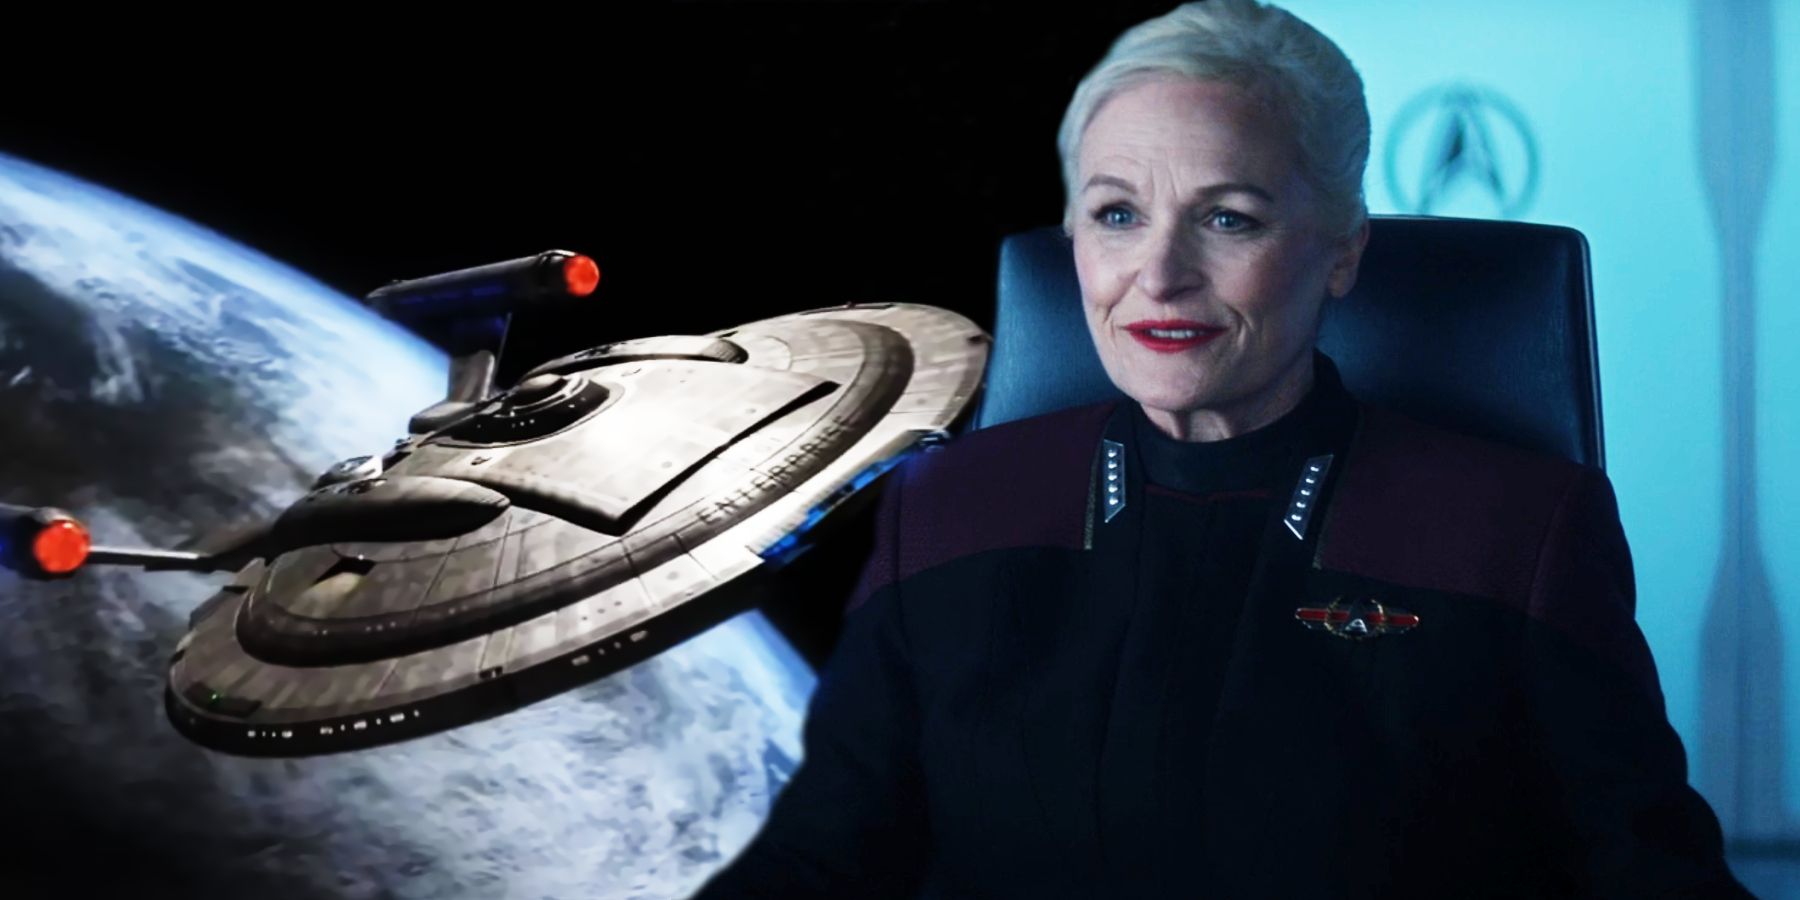 The Enterprise NX-01 and Admiral Shelby in Star Trek: Picard season 3